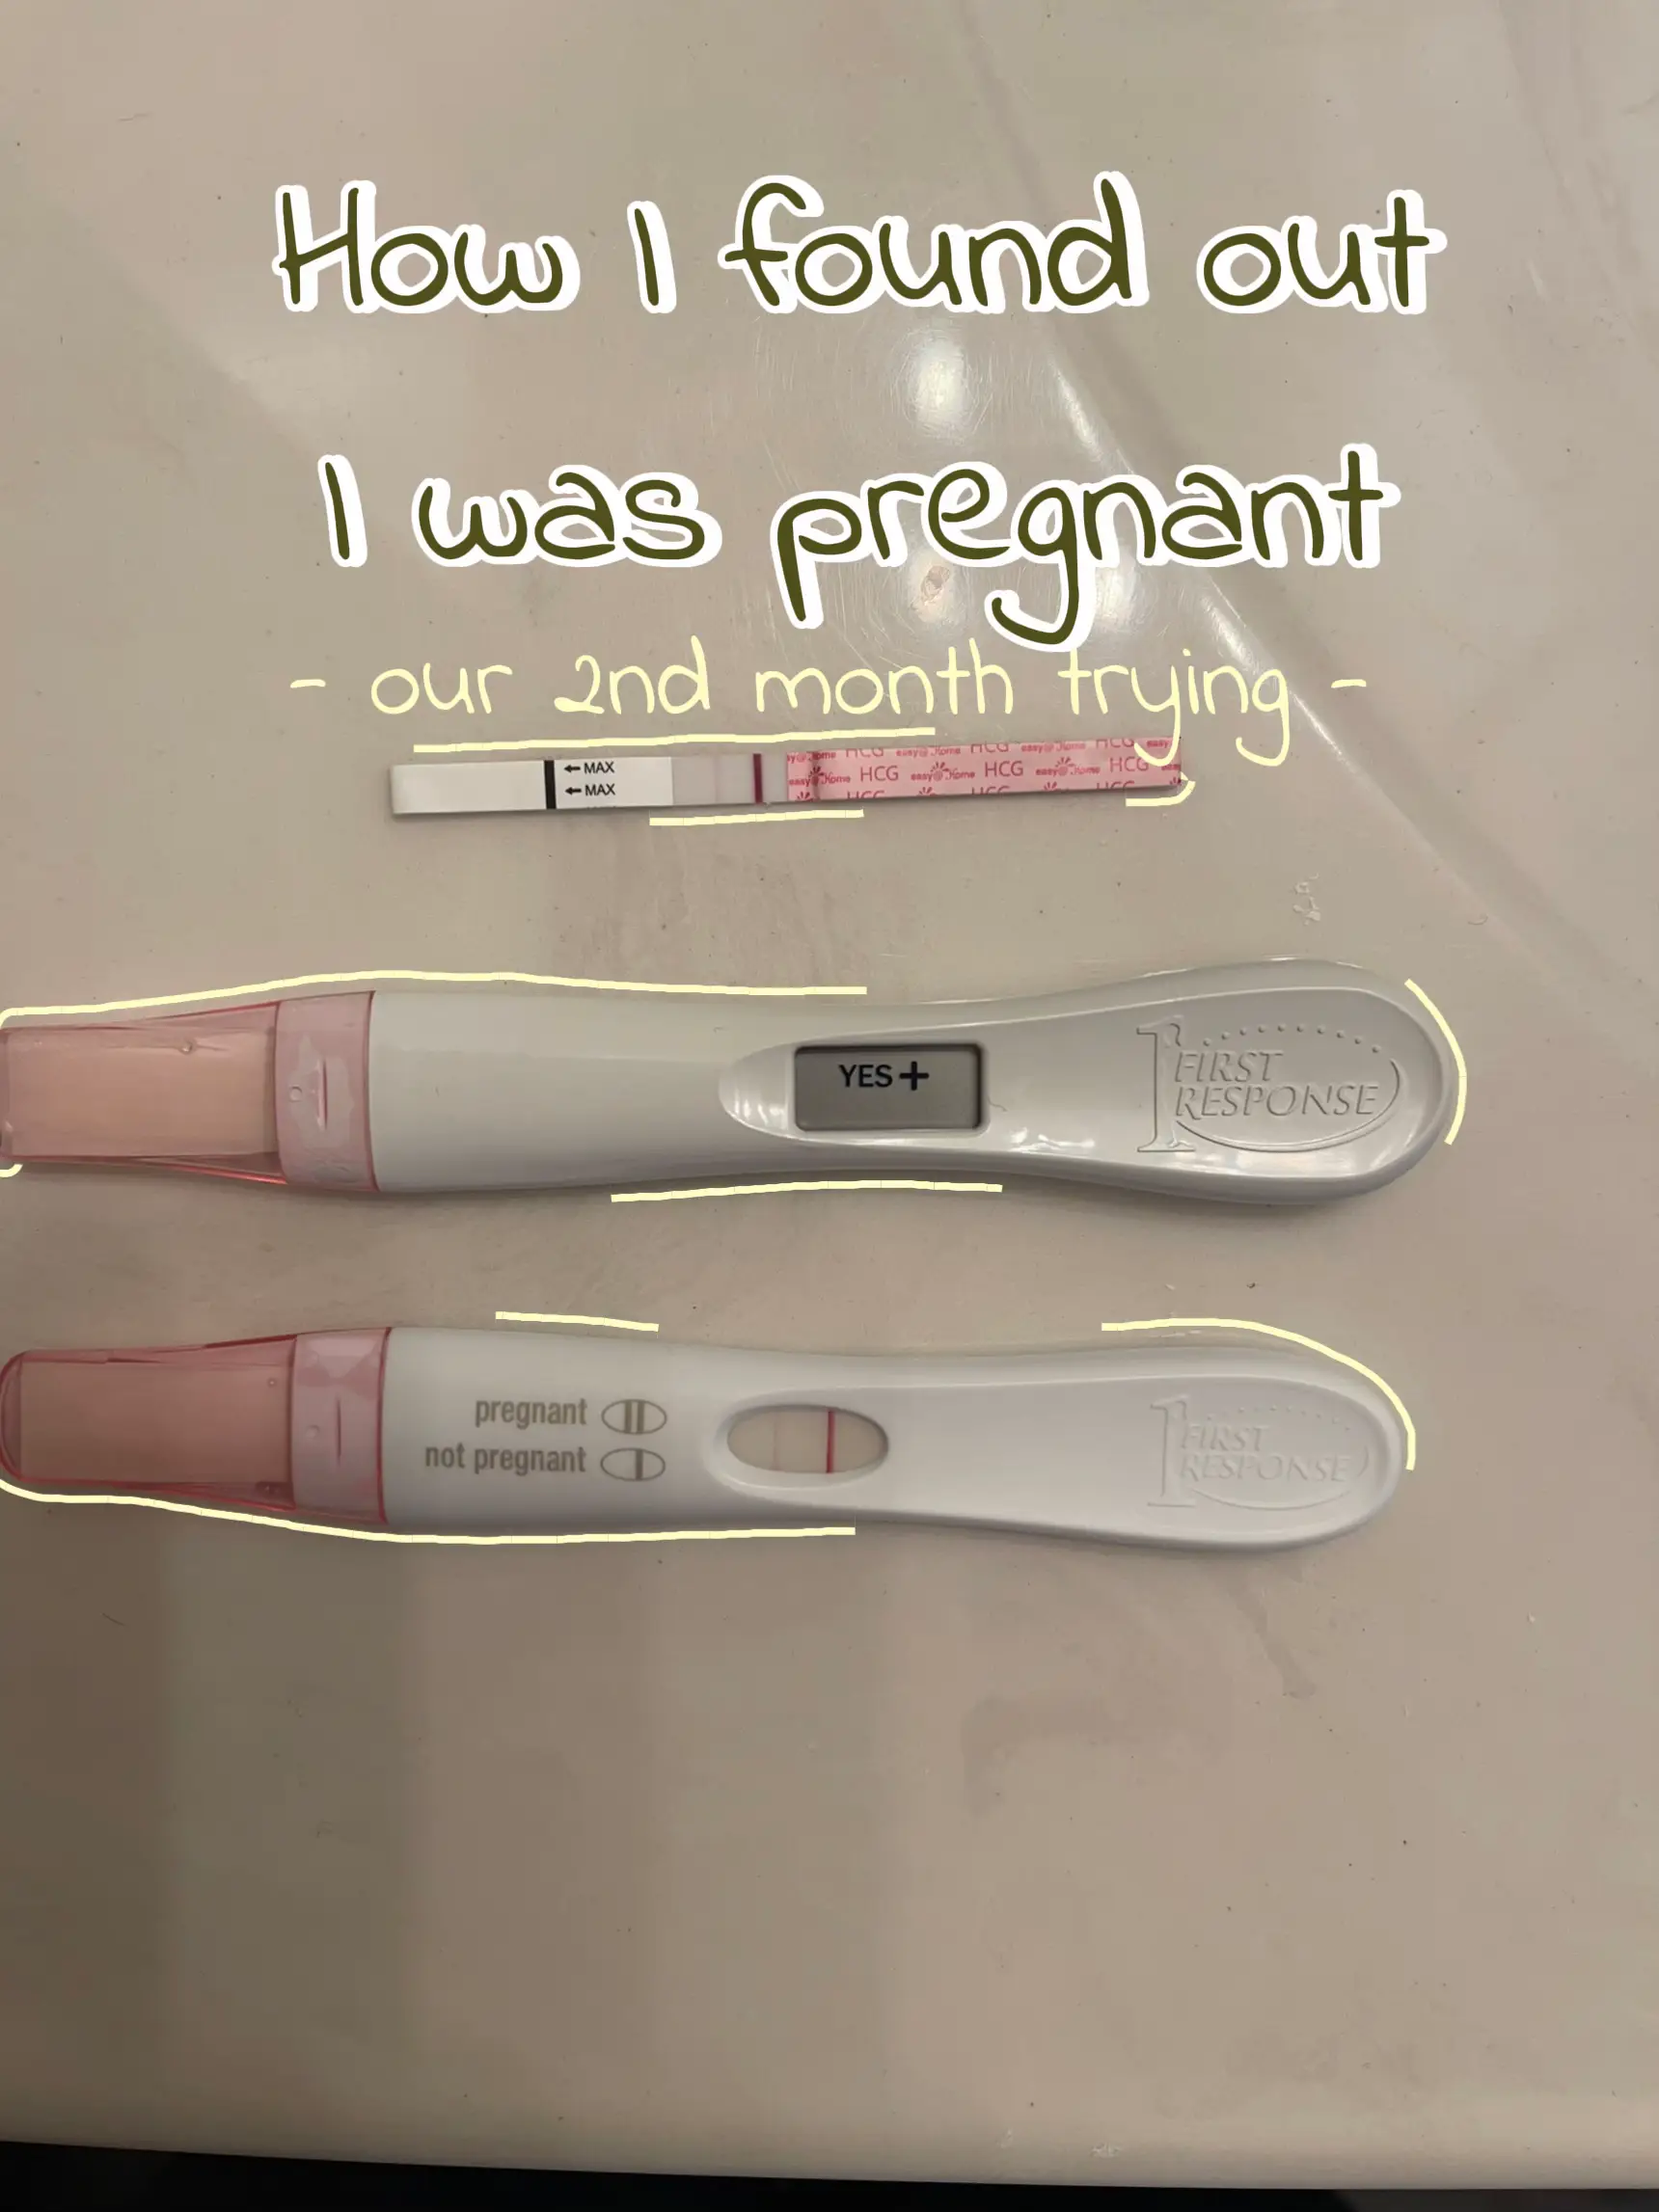 Short luteal phase after miscarriage - TTC/ Pregnancy After a Loss, Forums